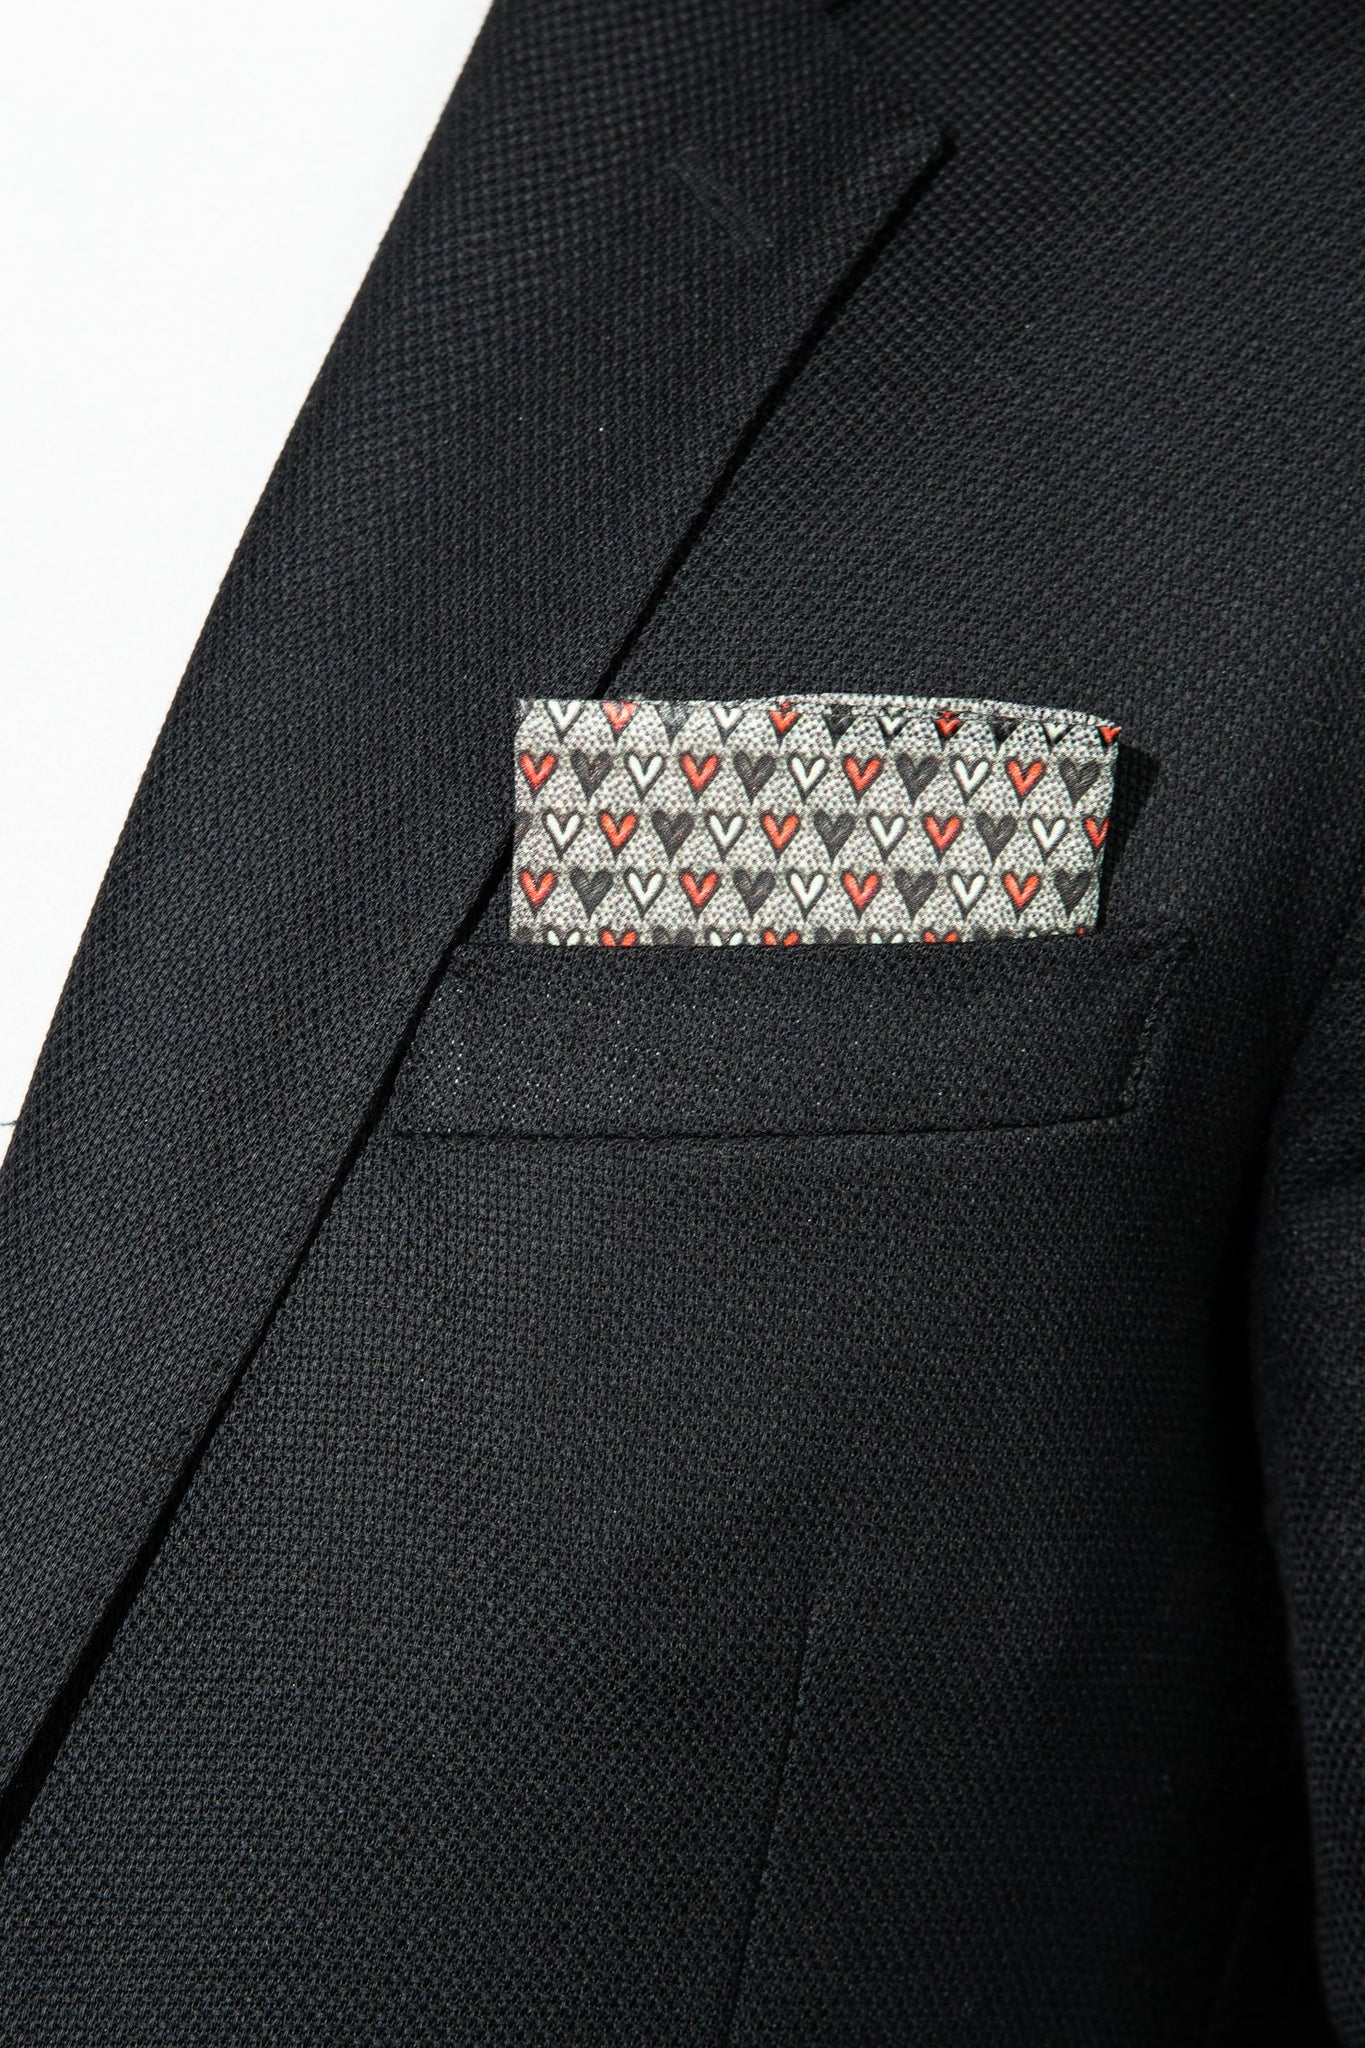 RARE CUT's Mr. Lover Lover Pocket Square Worn in a Suit Jacket